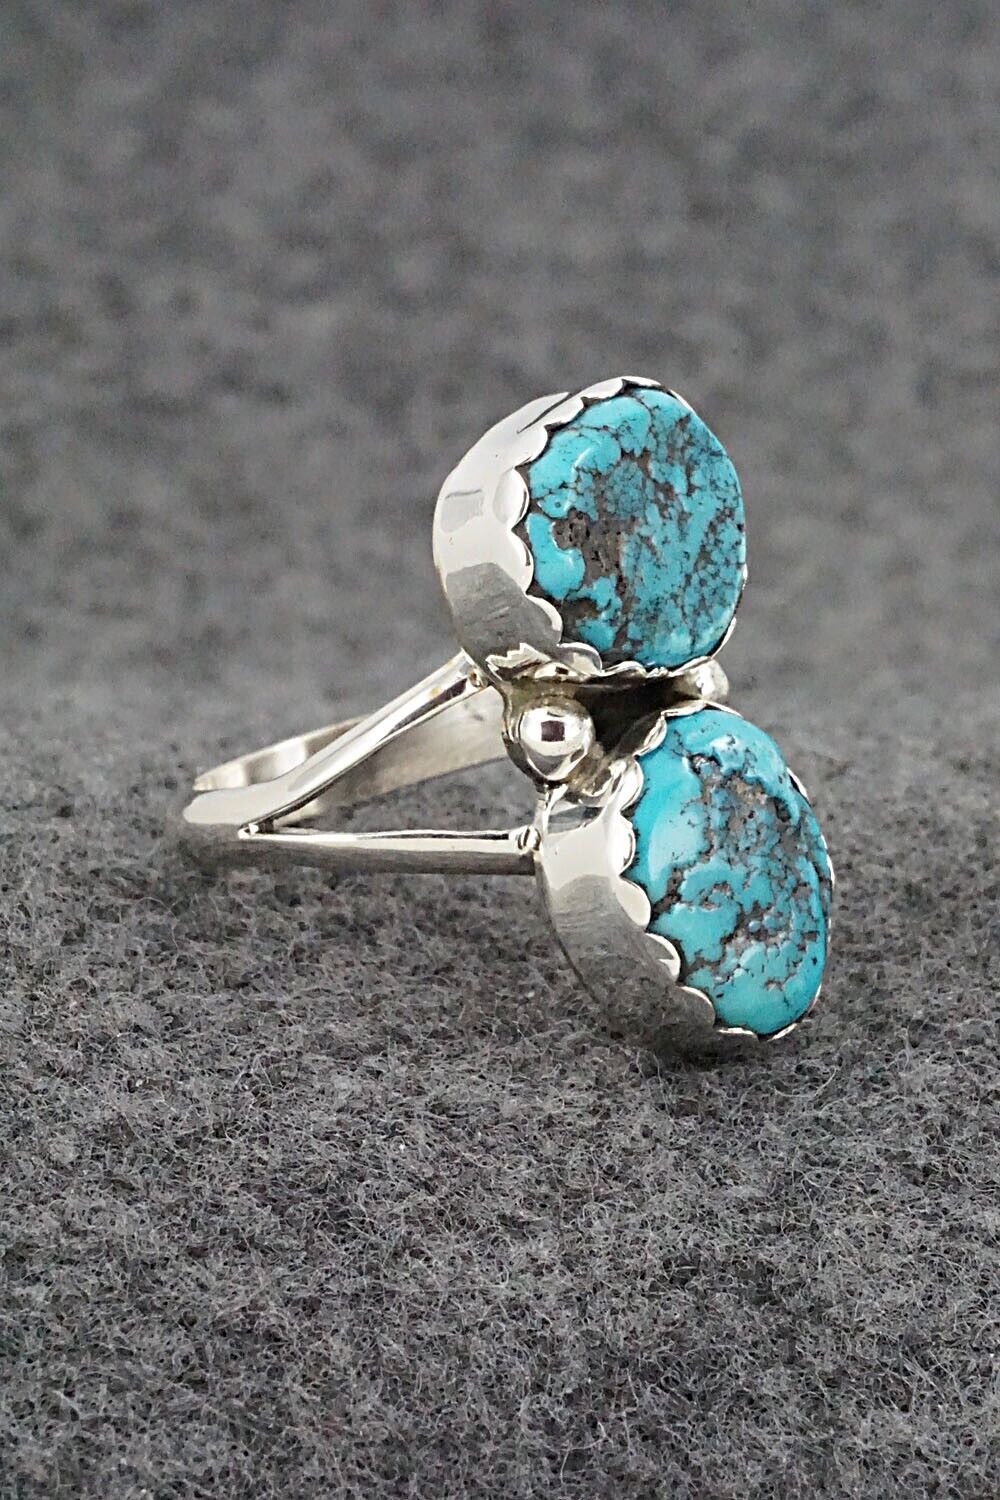 Turquoise & Sterling Silver Ring - Pearlene Spencer - Size 7.5